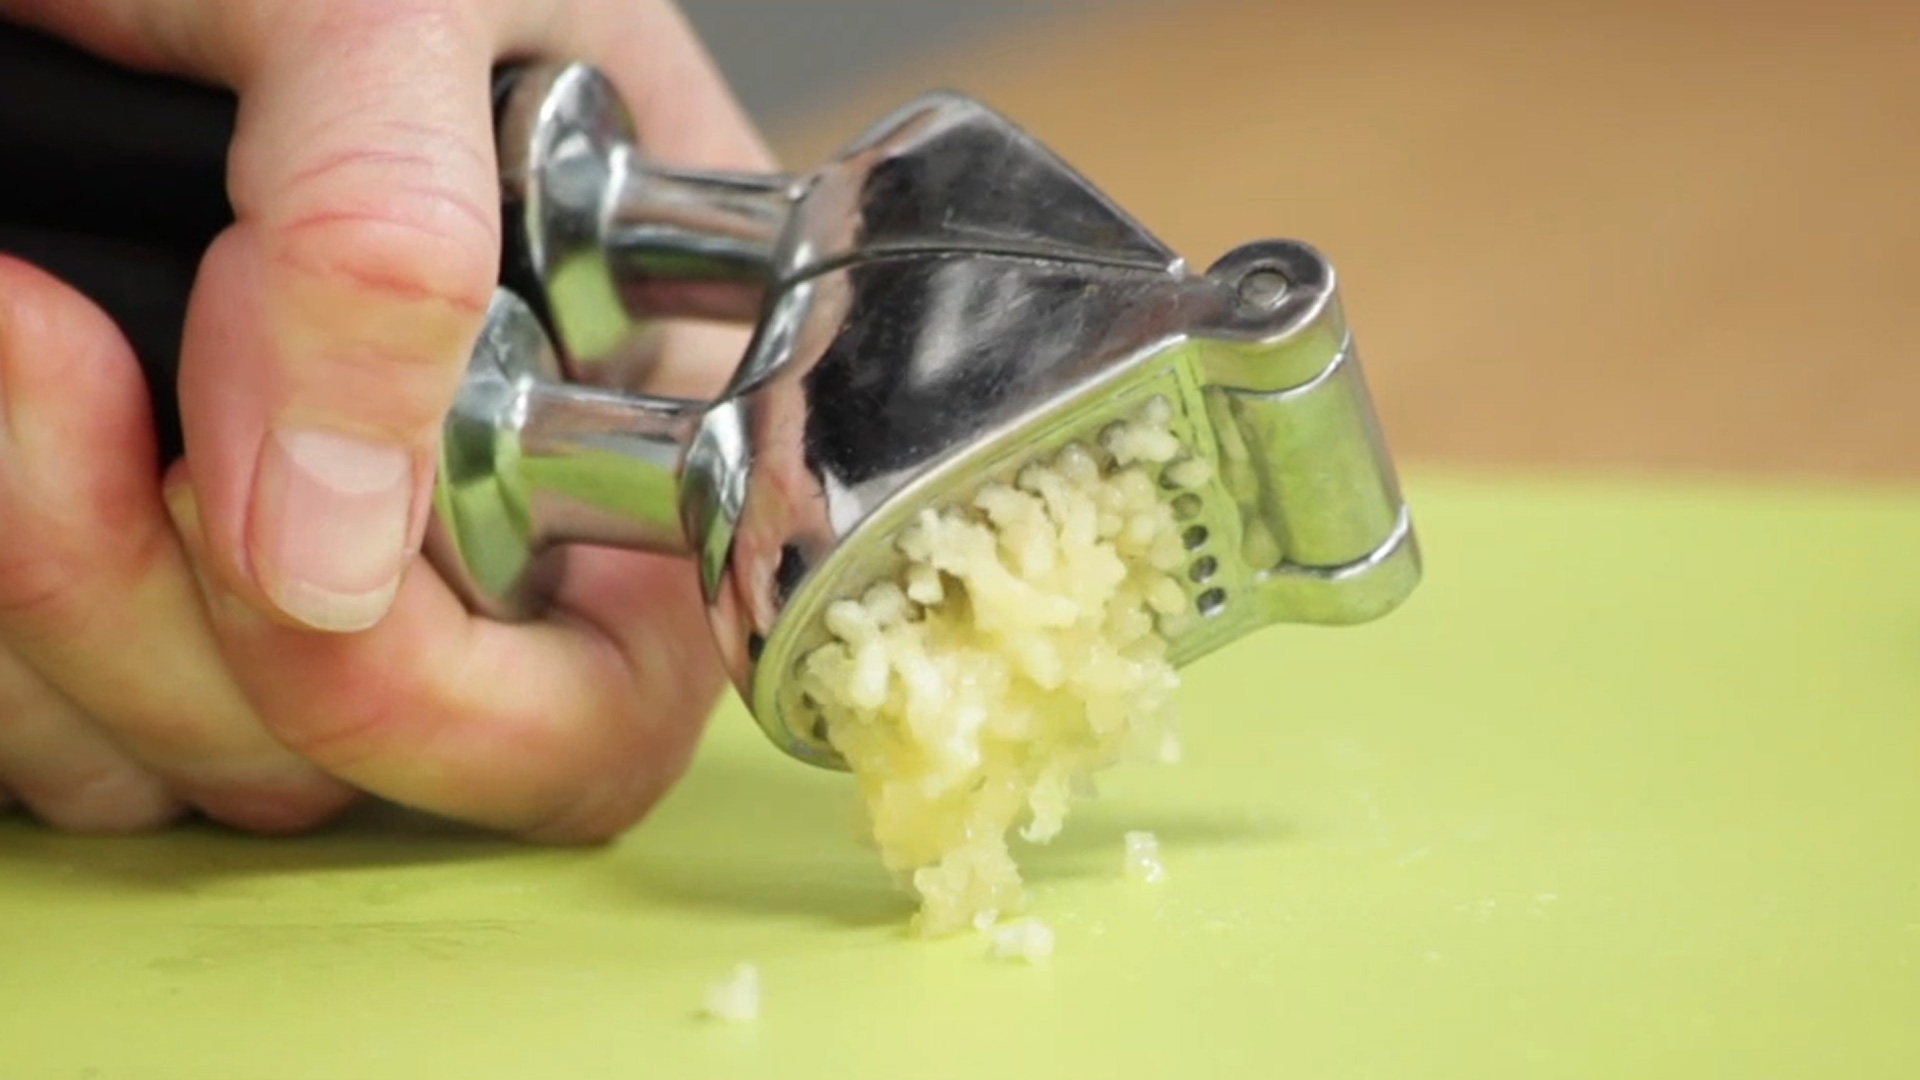 How to Crush Garlic: Master this Easy, Essential Technique